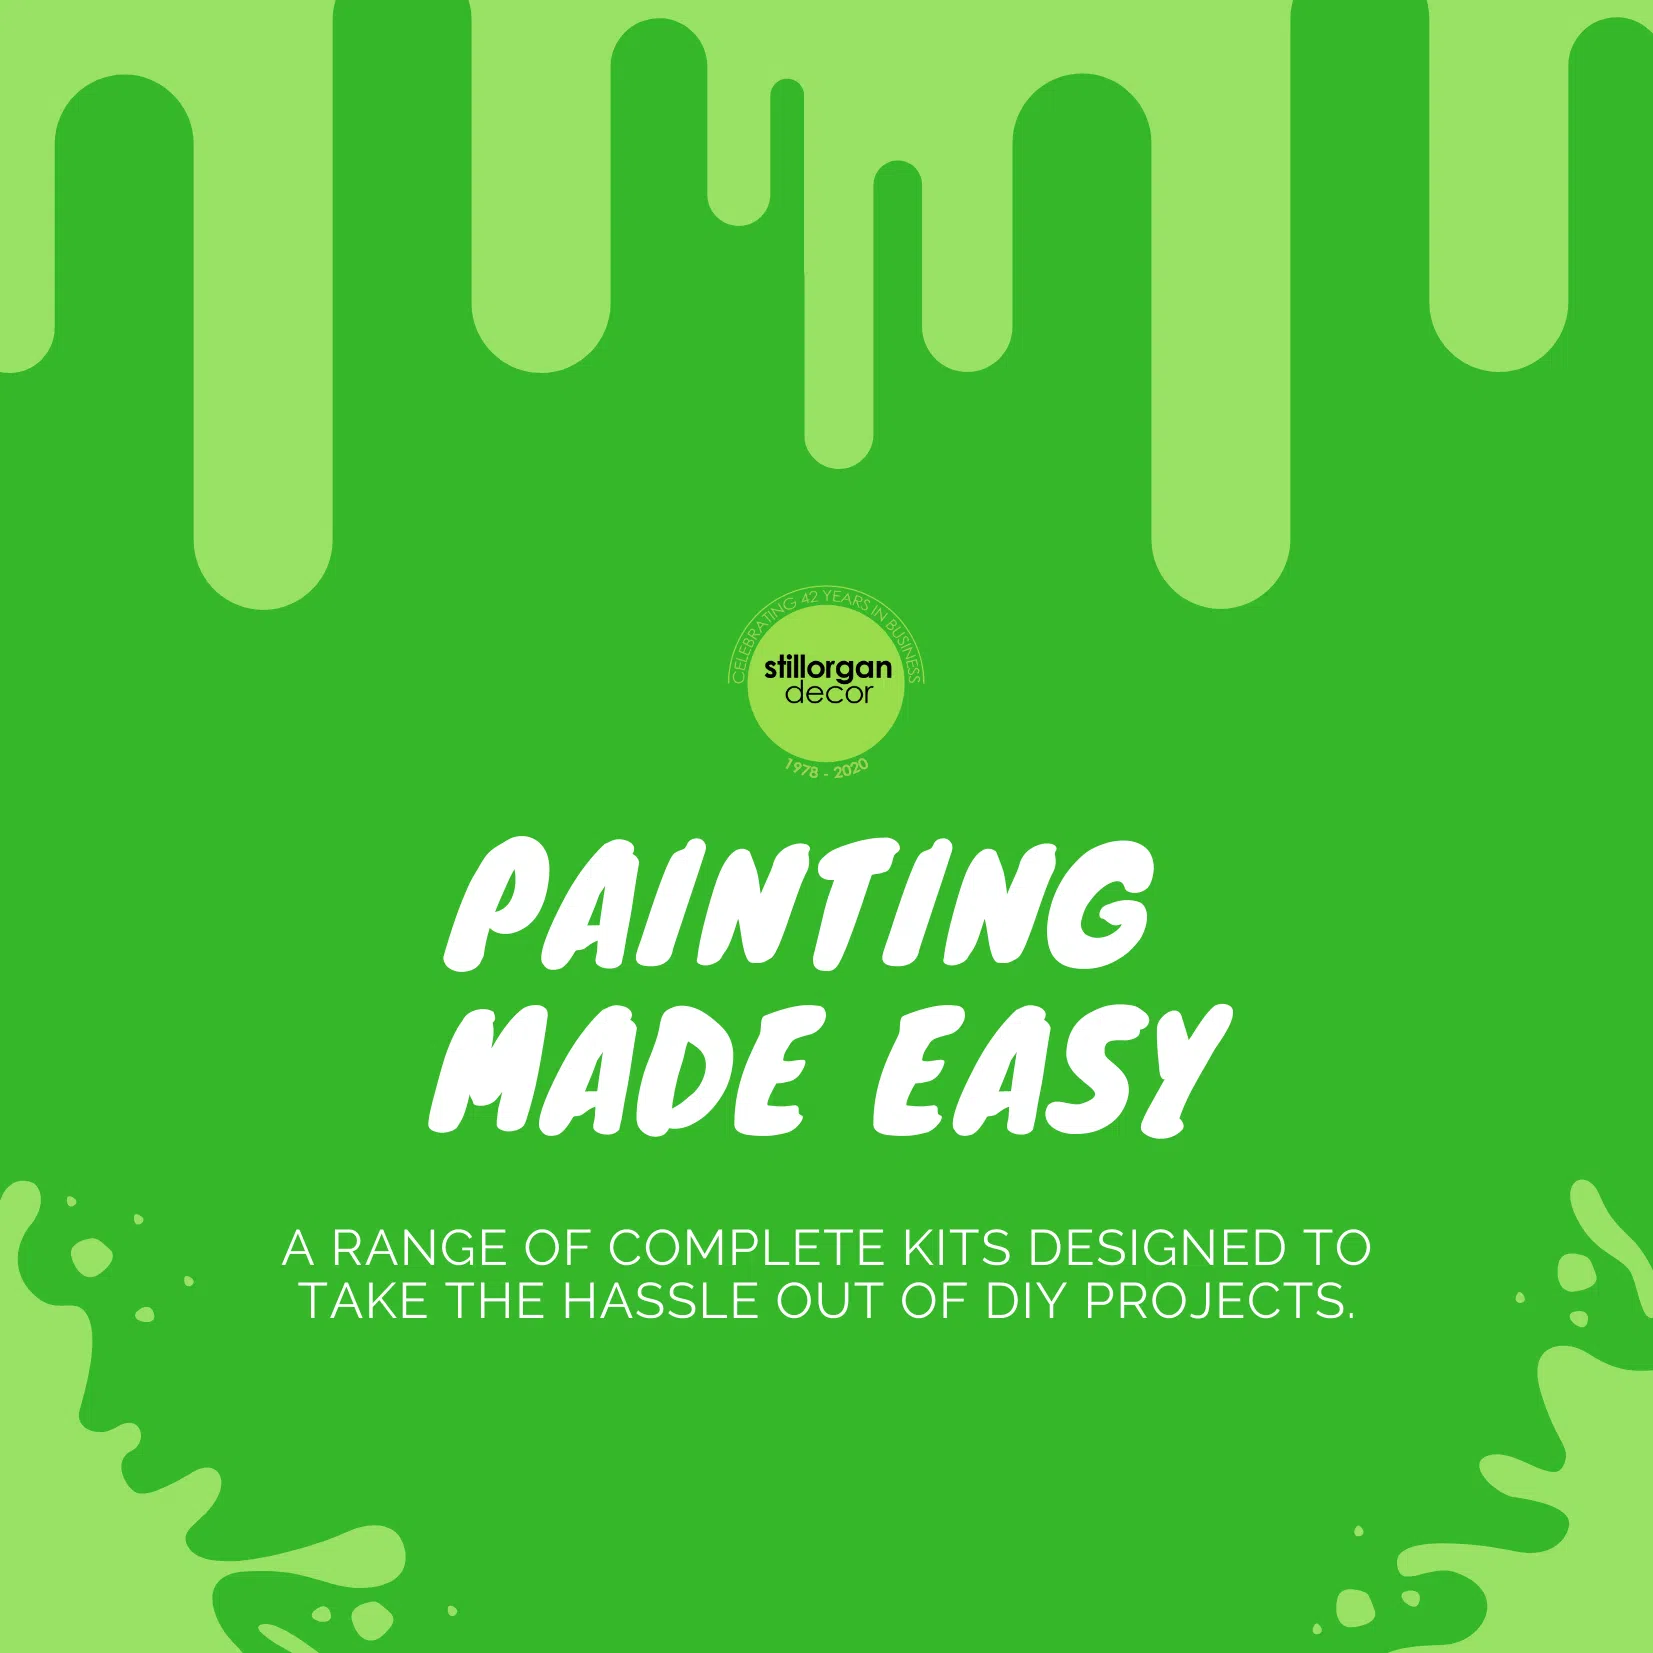 take the hassle out of painting with our 'painting made easy kits' - Stillorgan Decor